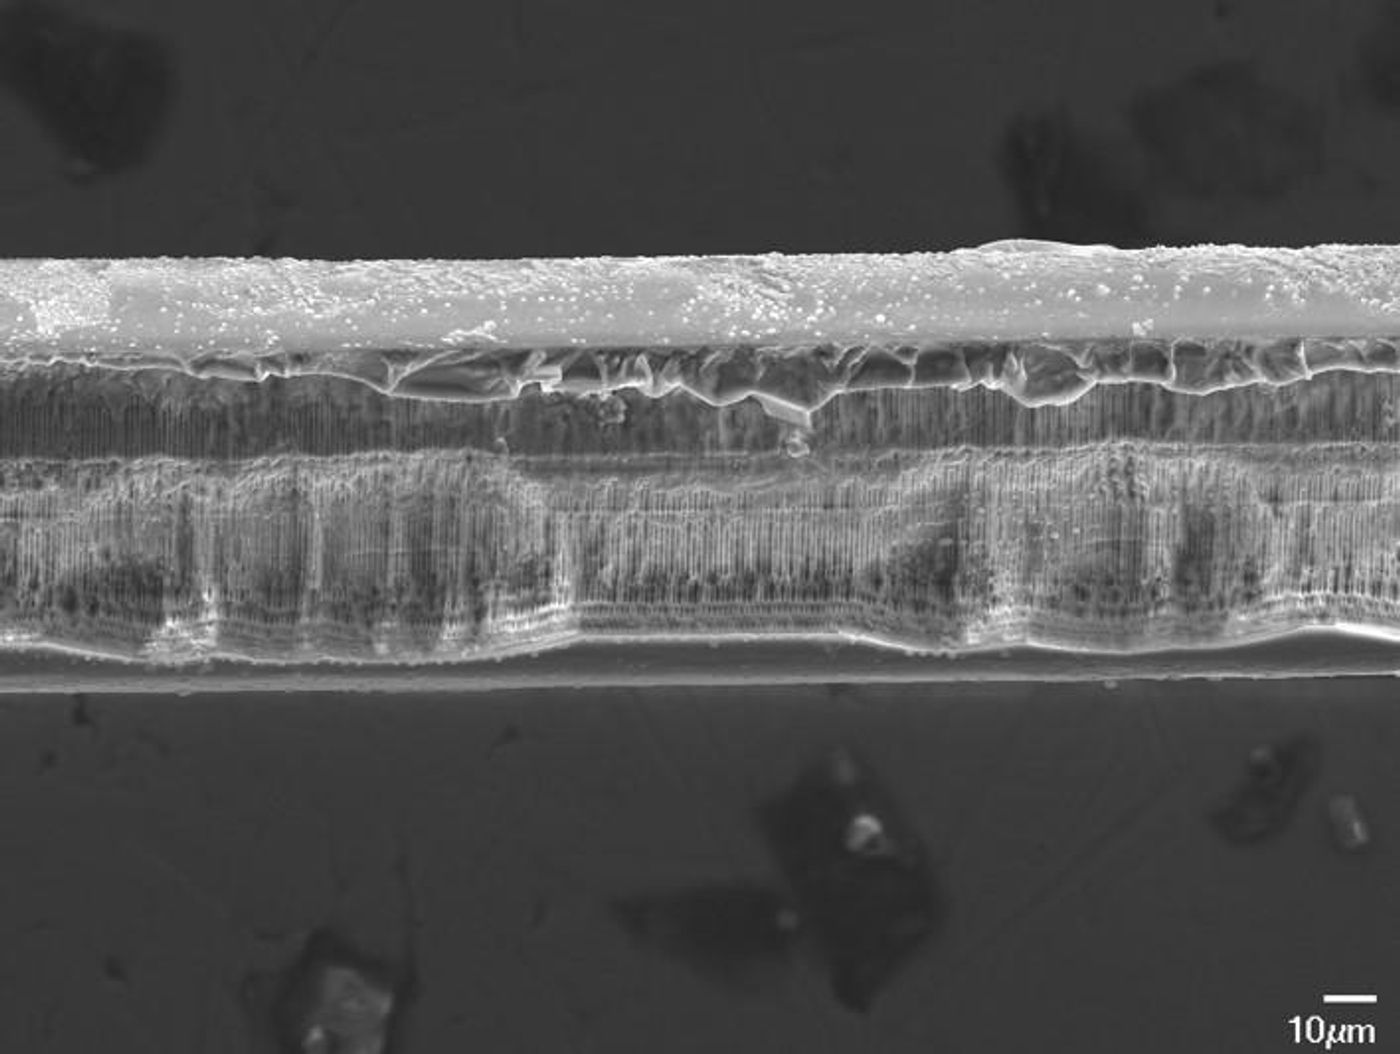 A side view of a bioresorbable fiber Bragg grating after it has dissolved in liquid. Maria Konstantaki, Foundation of Research and Technology - Hellas